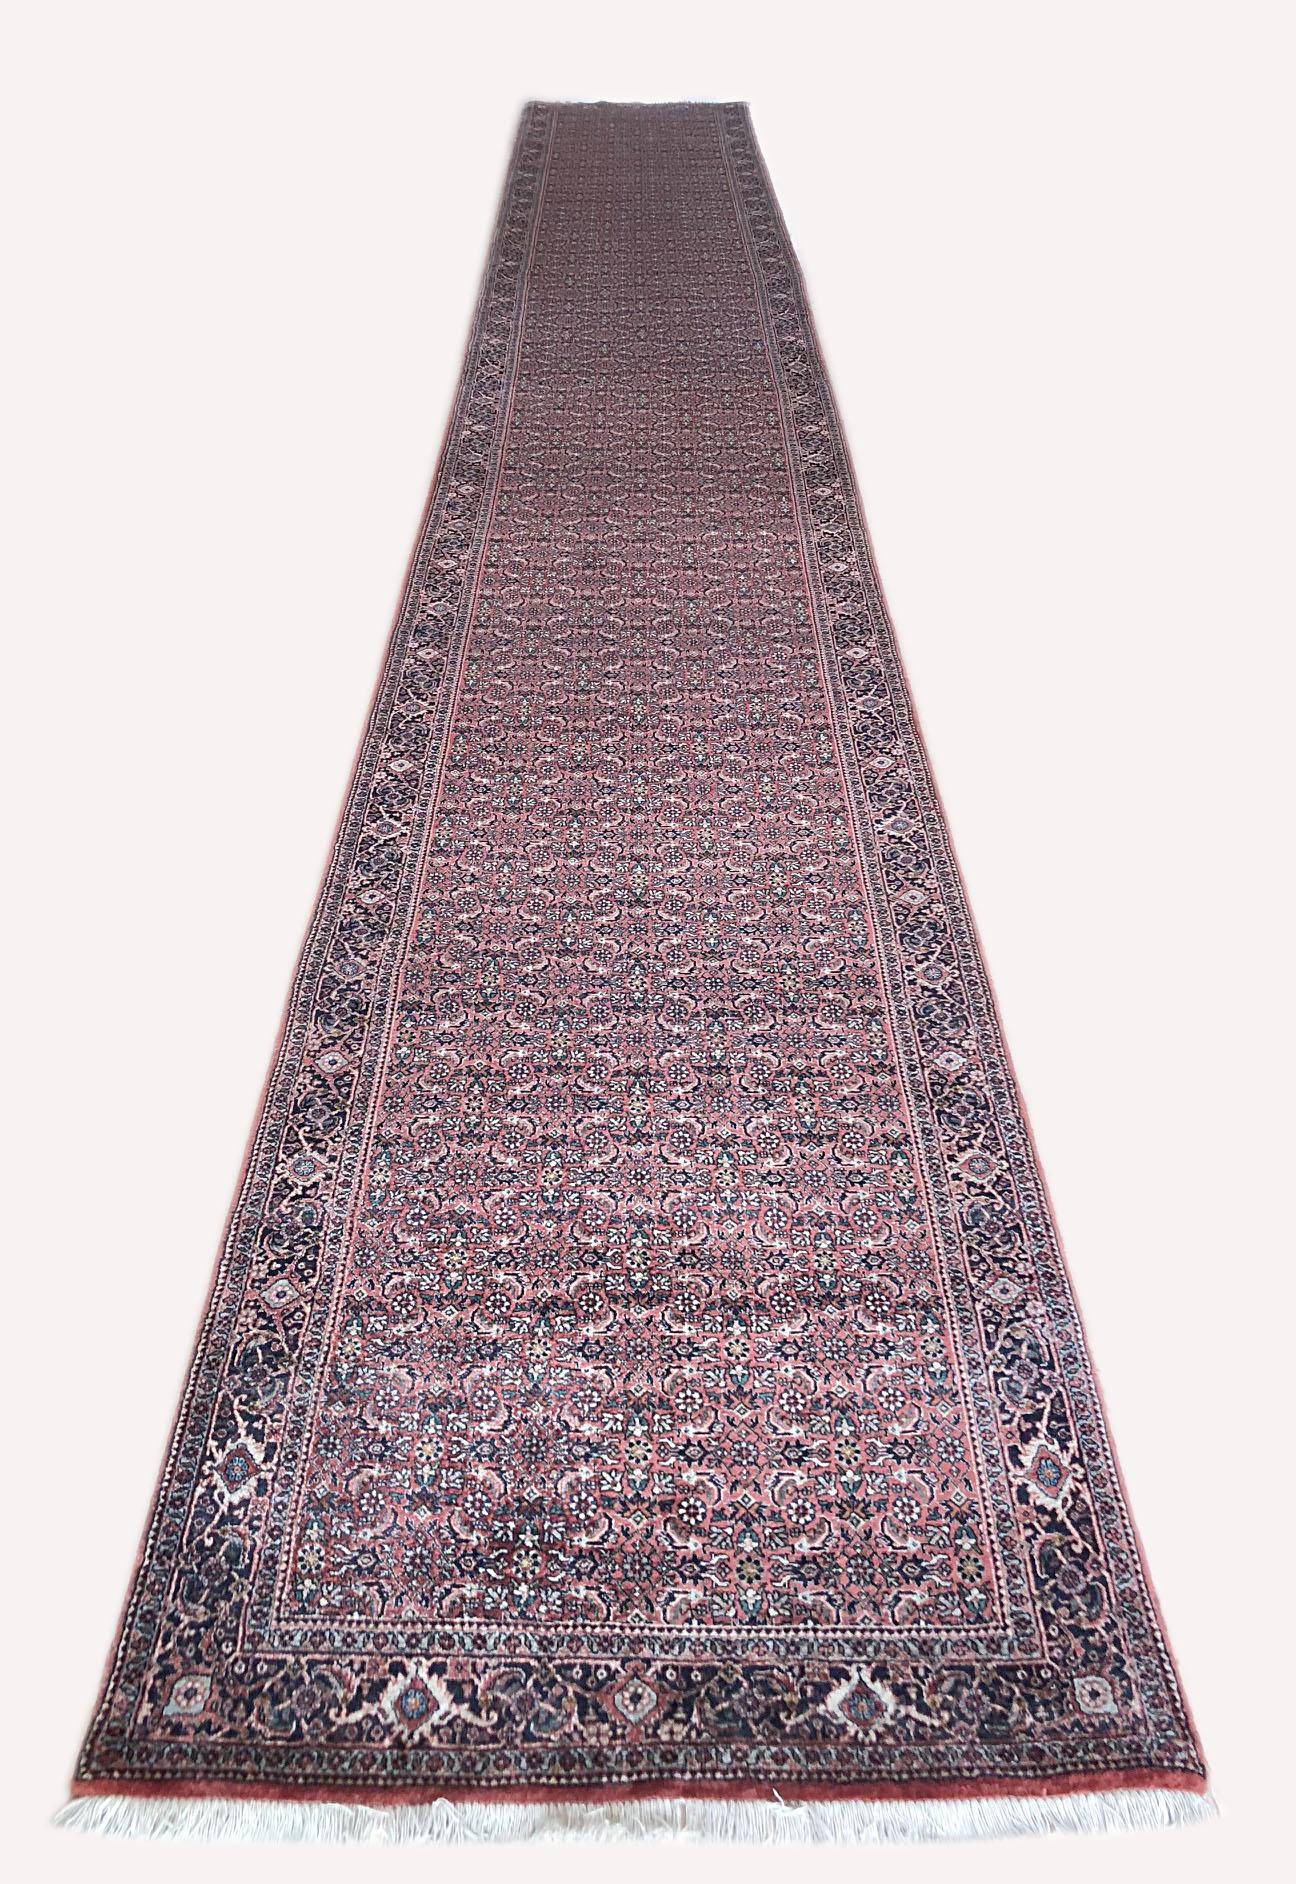 Persian Hand Knotted Blue Red Herati Design Bijar Runner Rug In Good Condition For Sale In San Diego, CA